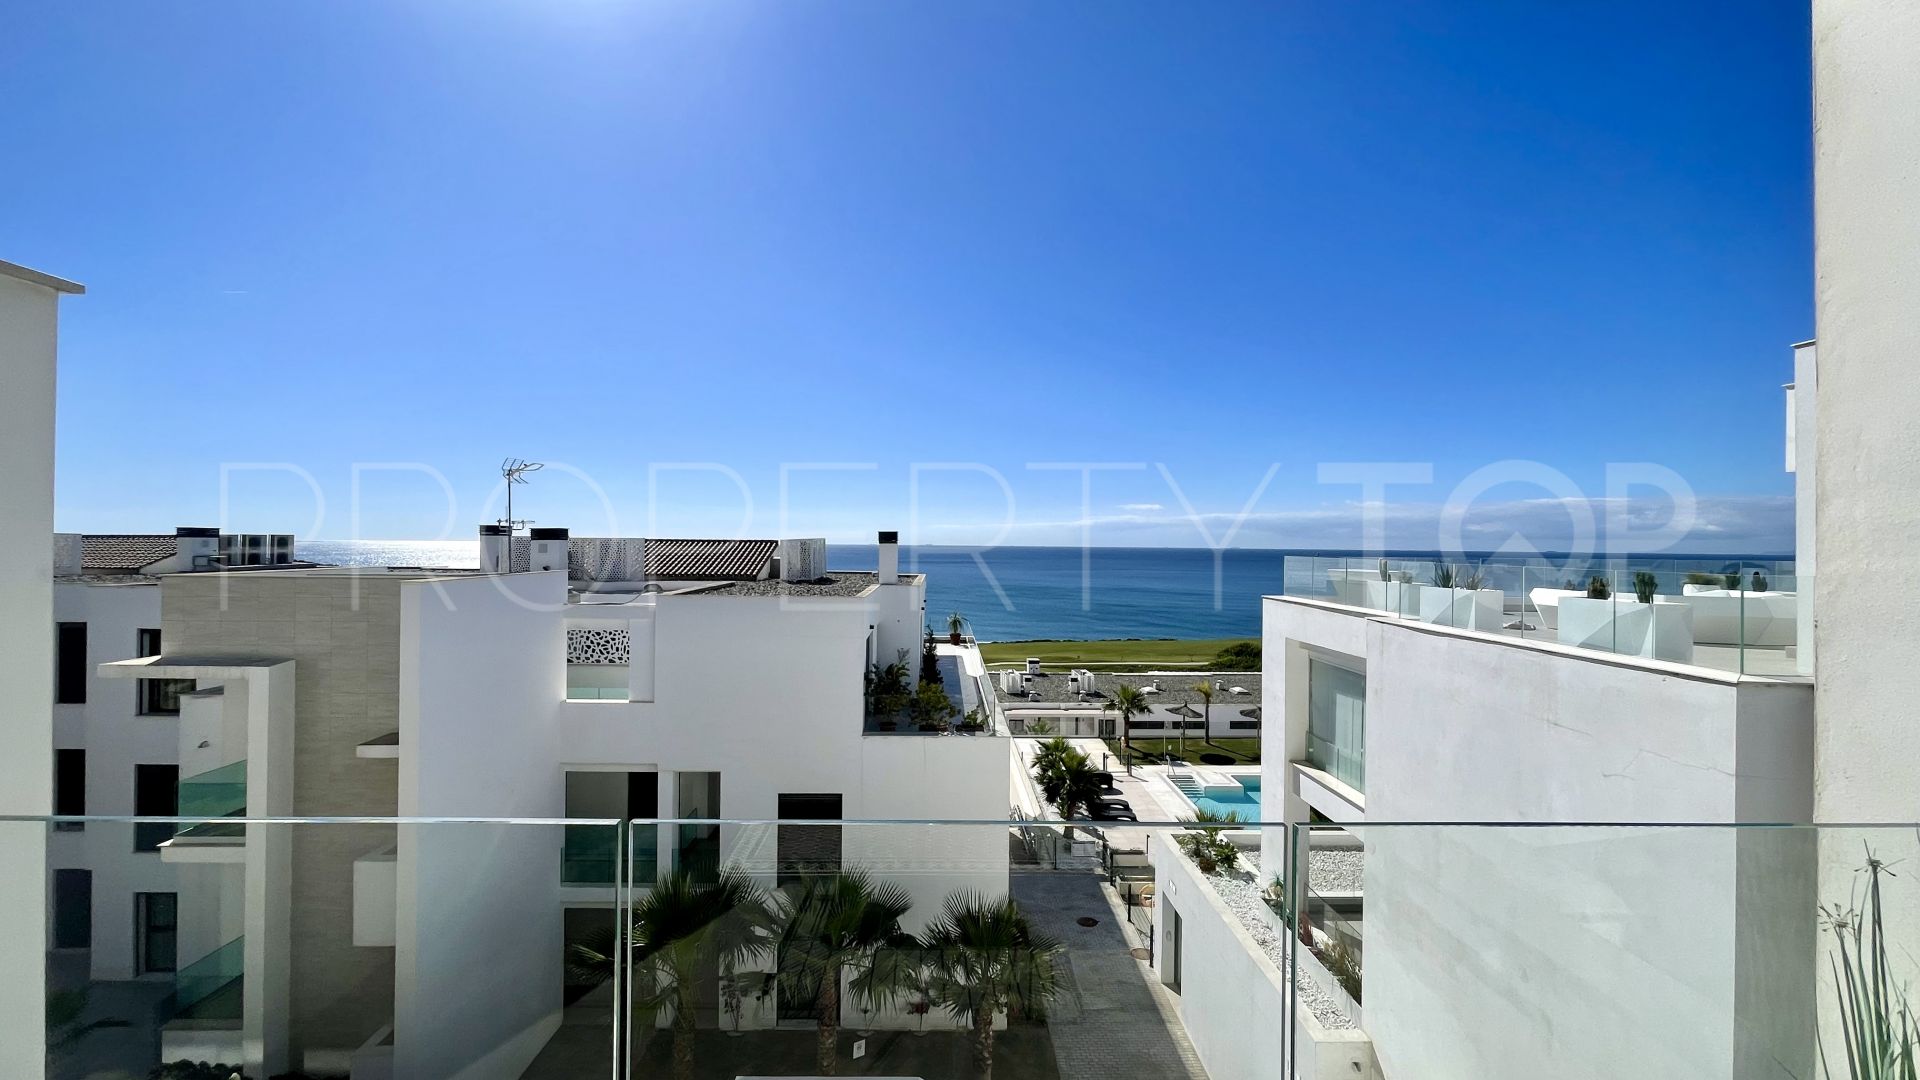 For sale apartment in Alcaidesa with 2 bedrooms